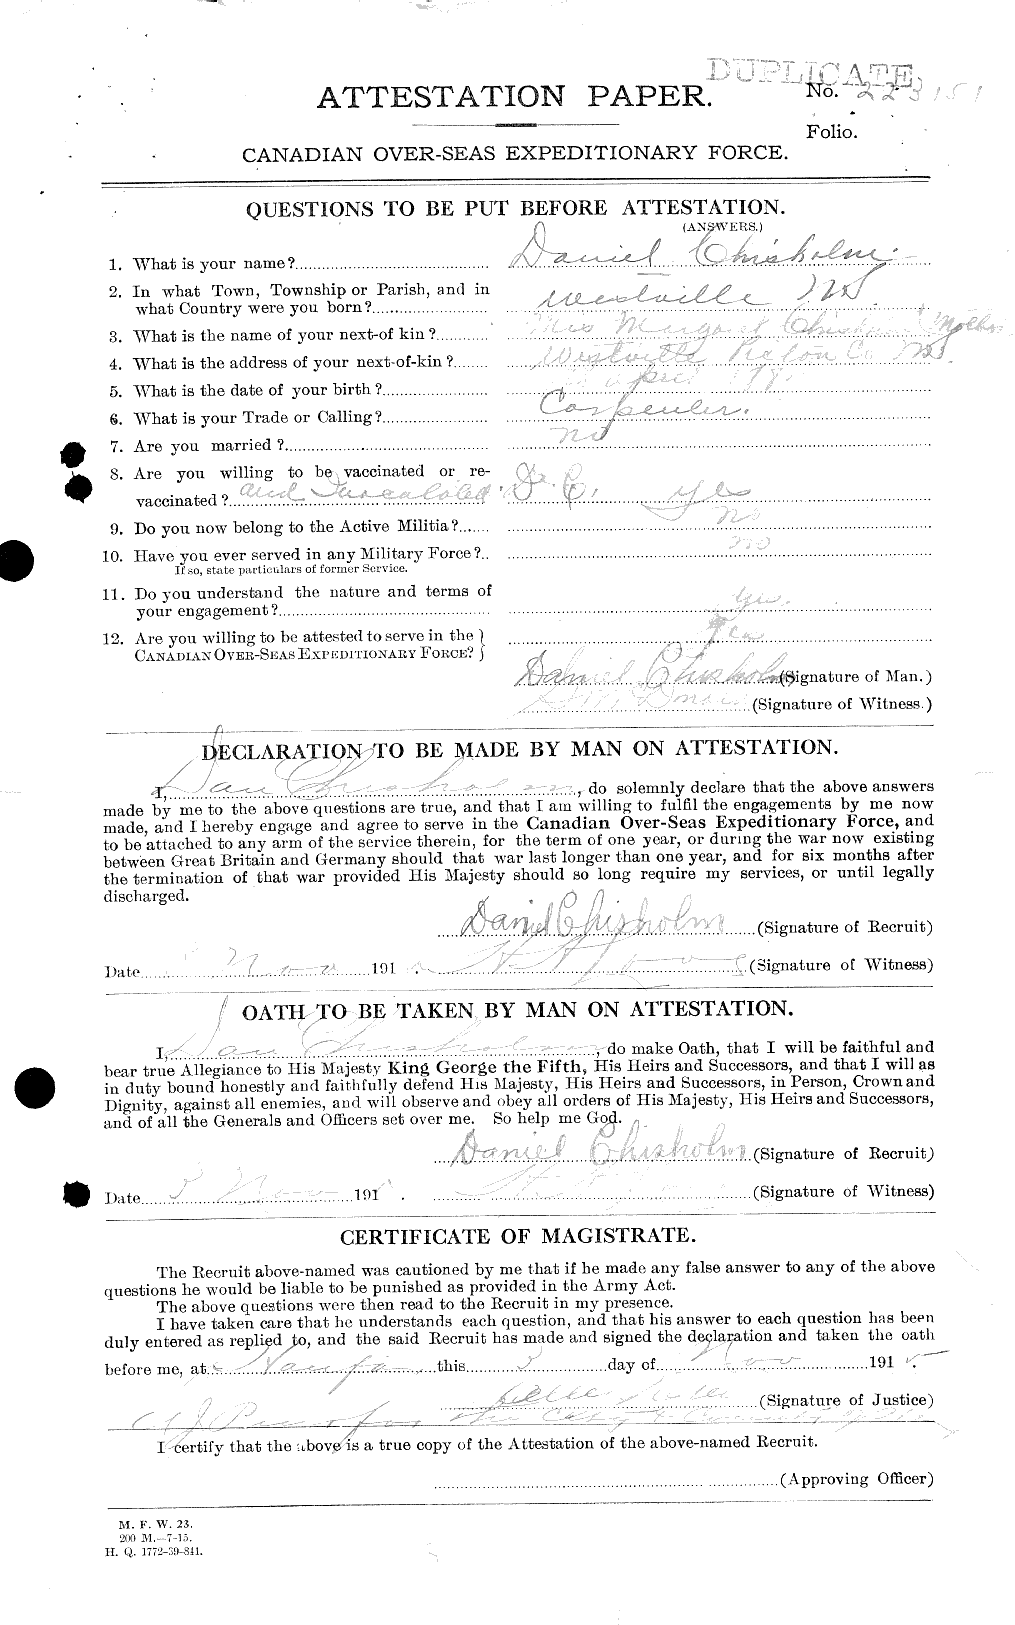 Personnel Records of the First World War - CEF 018246a